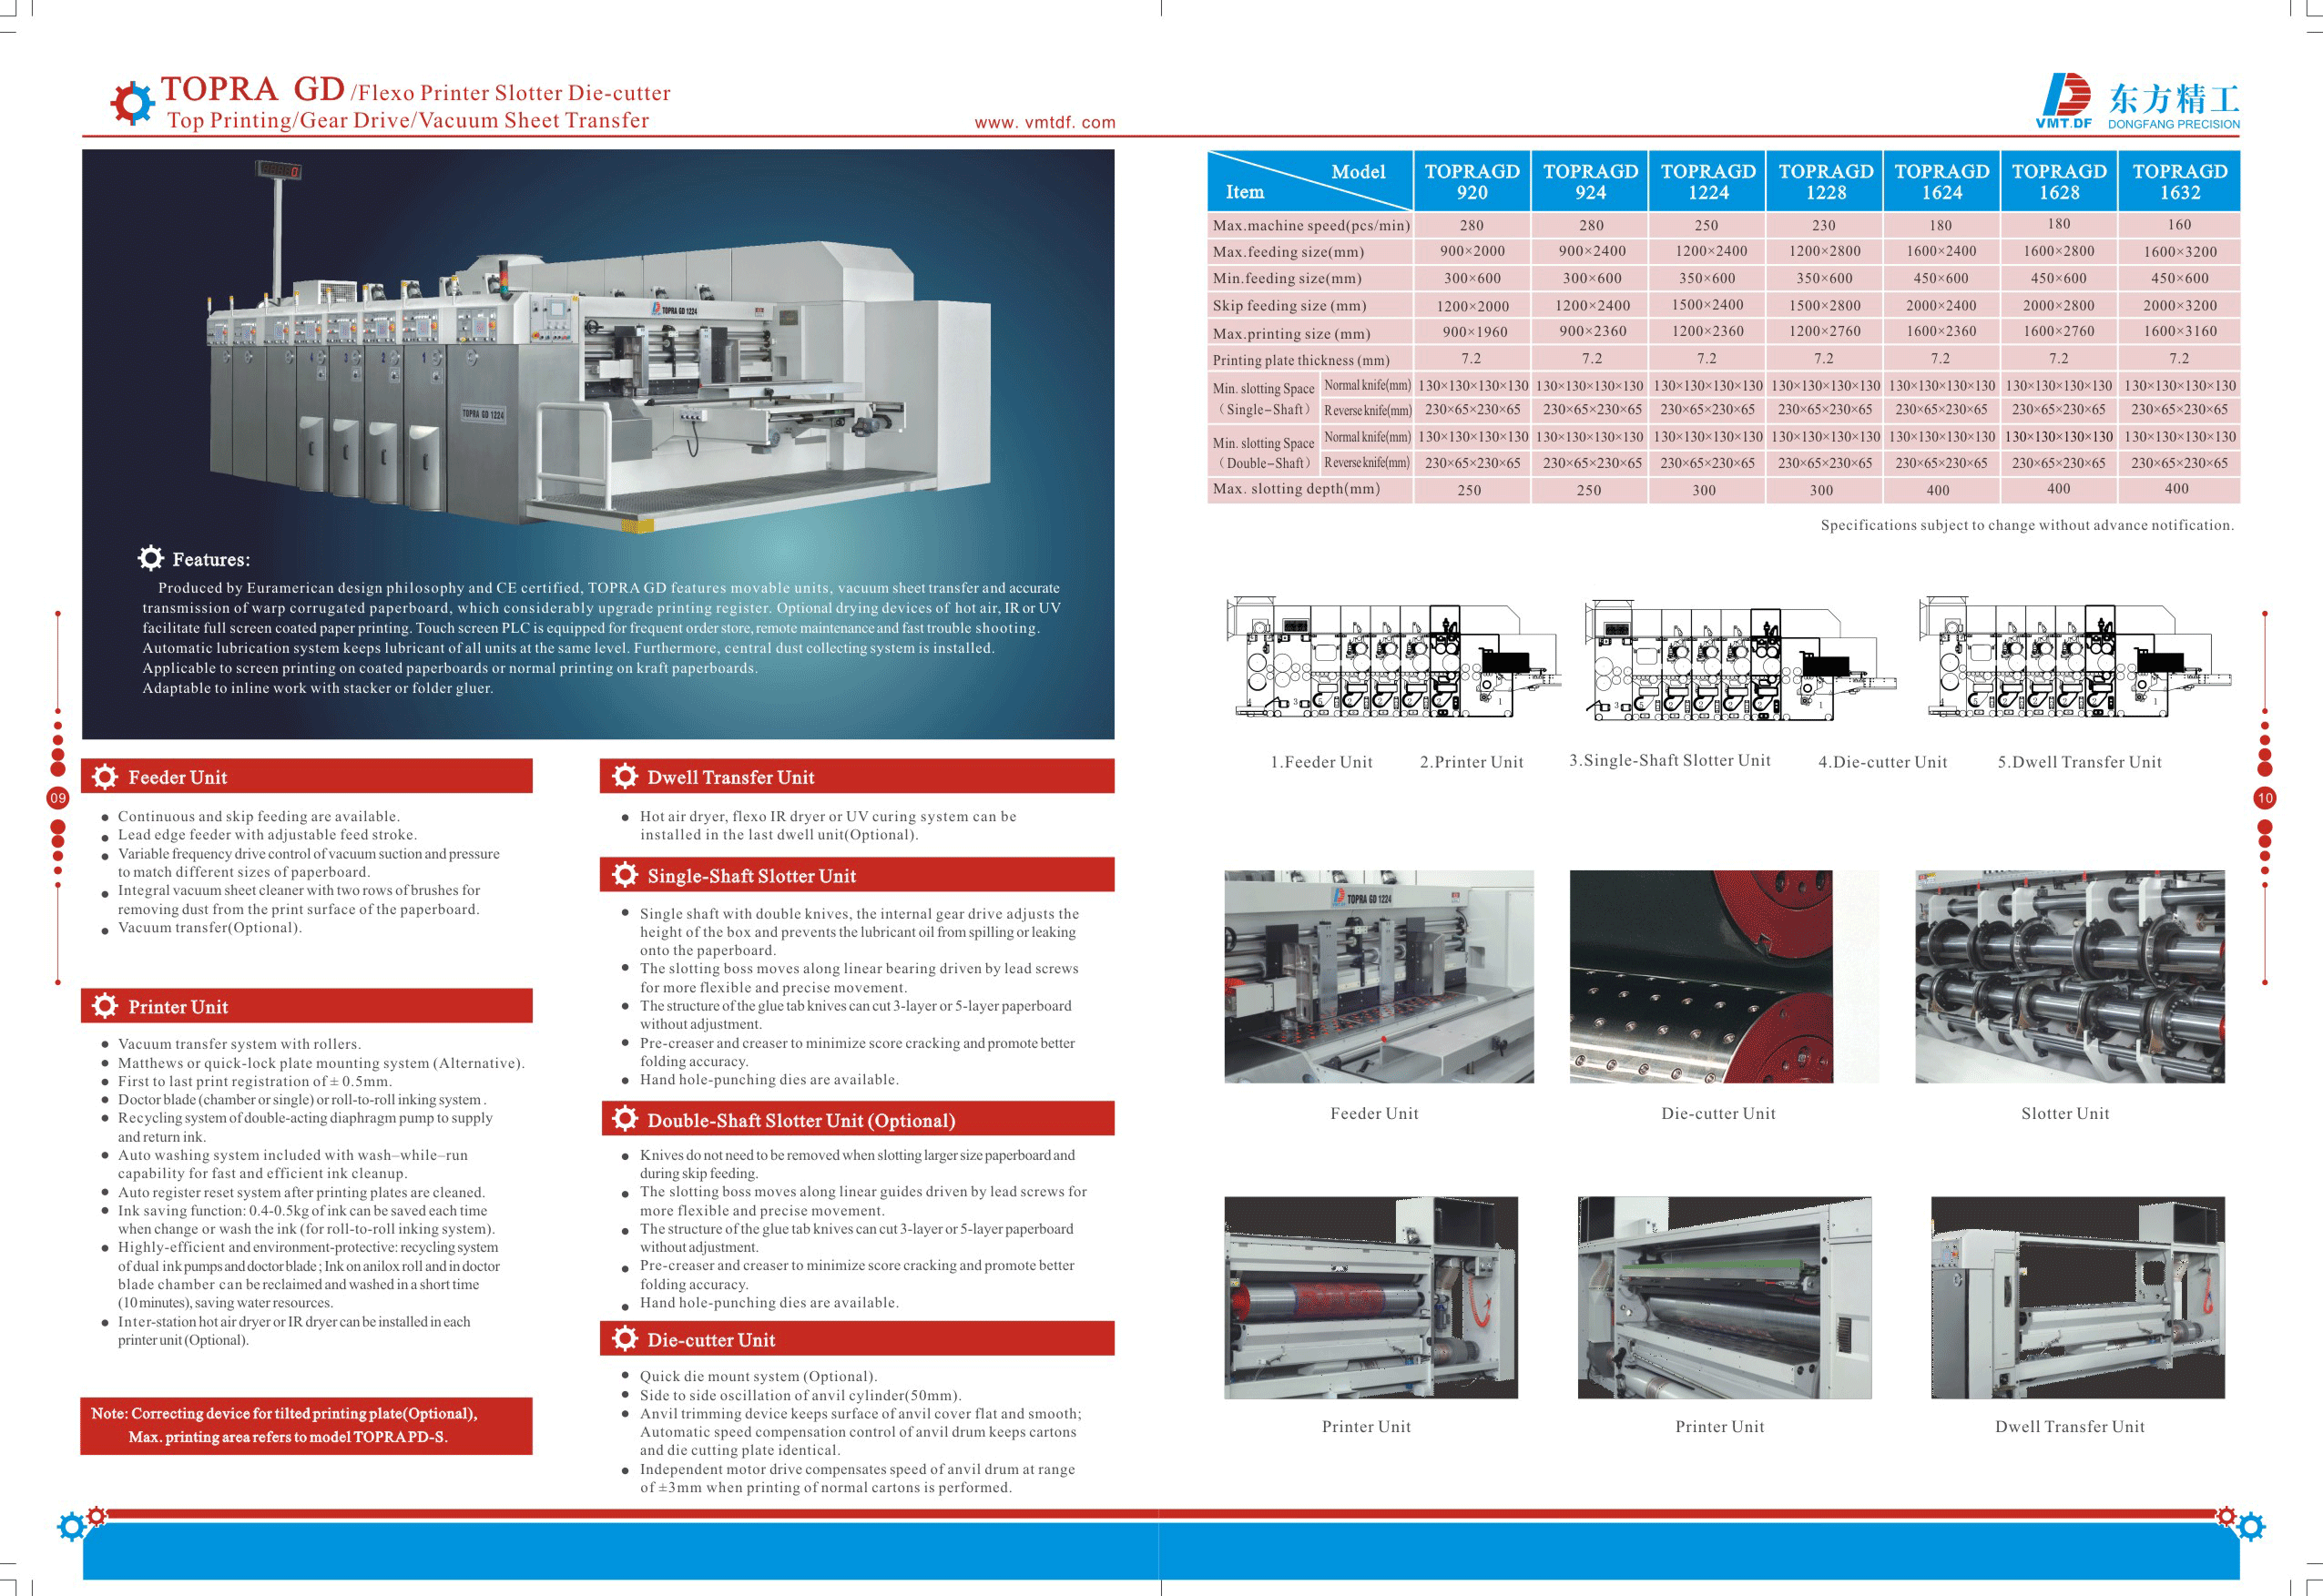 Learn more about the Topra GD Flexo Printer Slotter Die Cutter in the Dong Fang brochure.